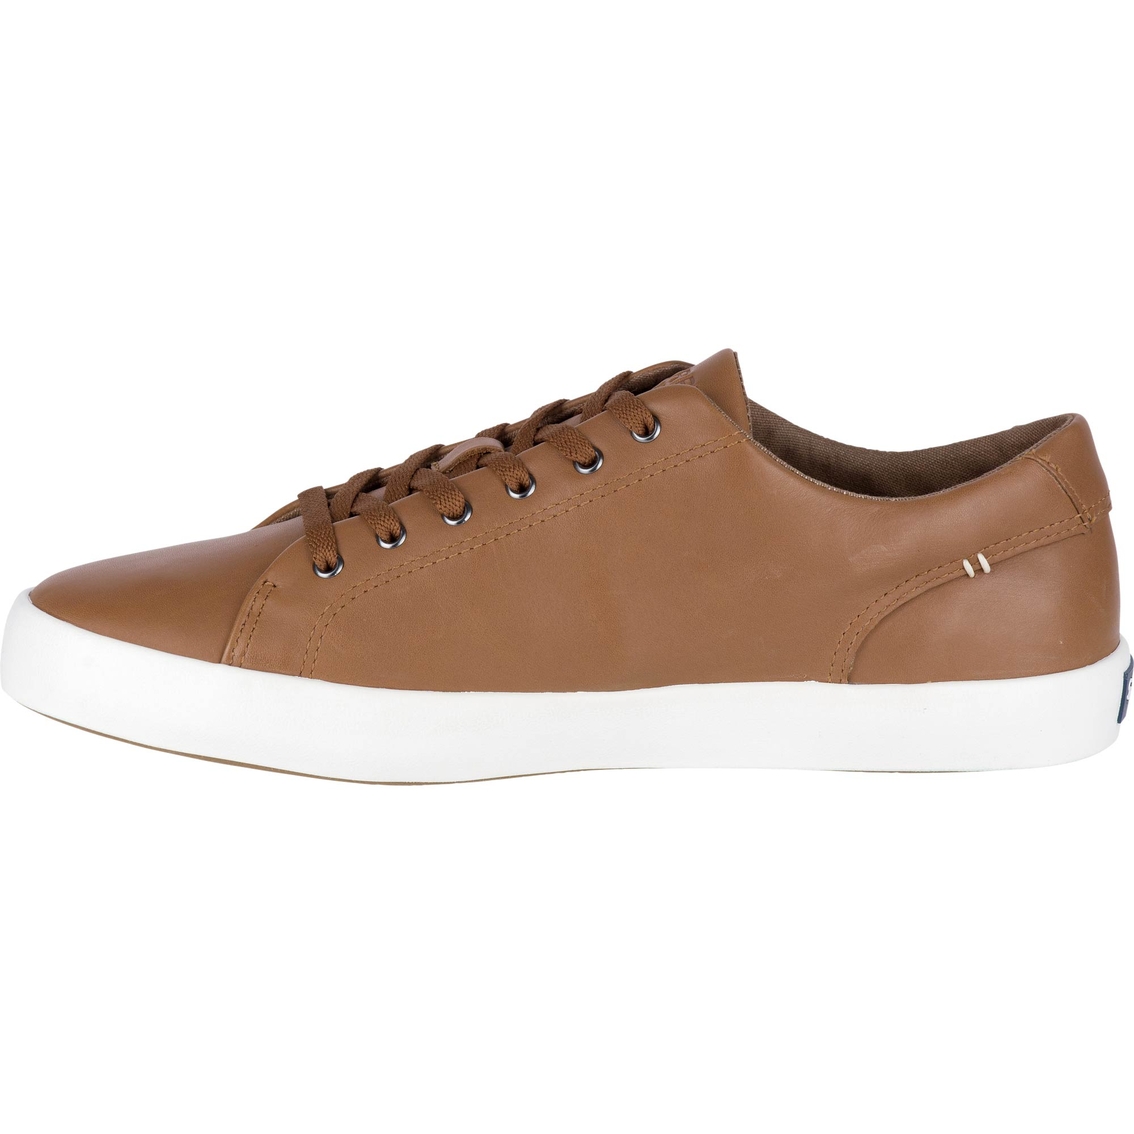 Sperry Wahoo LTT Leather Sneakers - Image 2 of 4